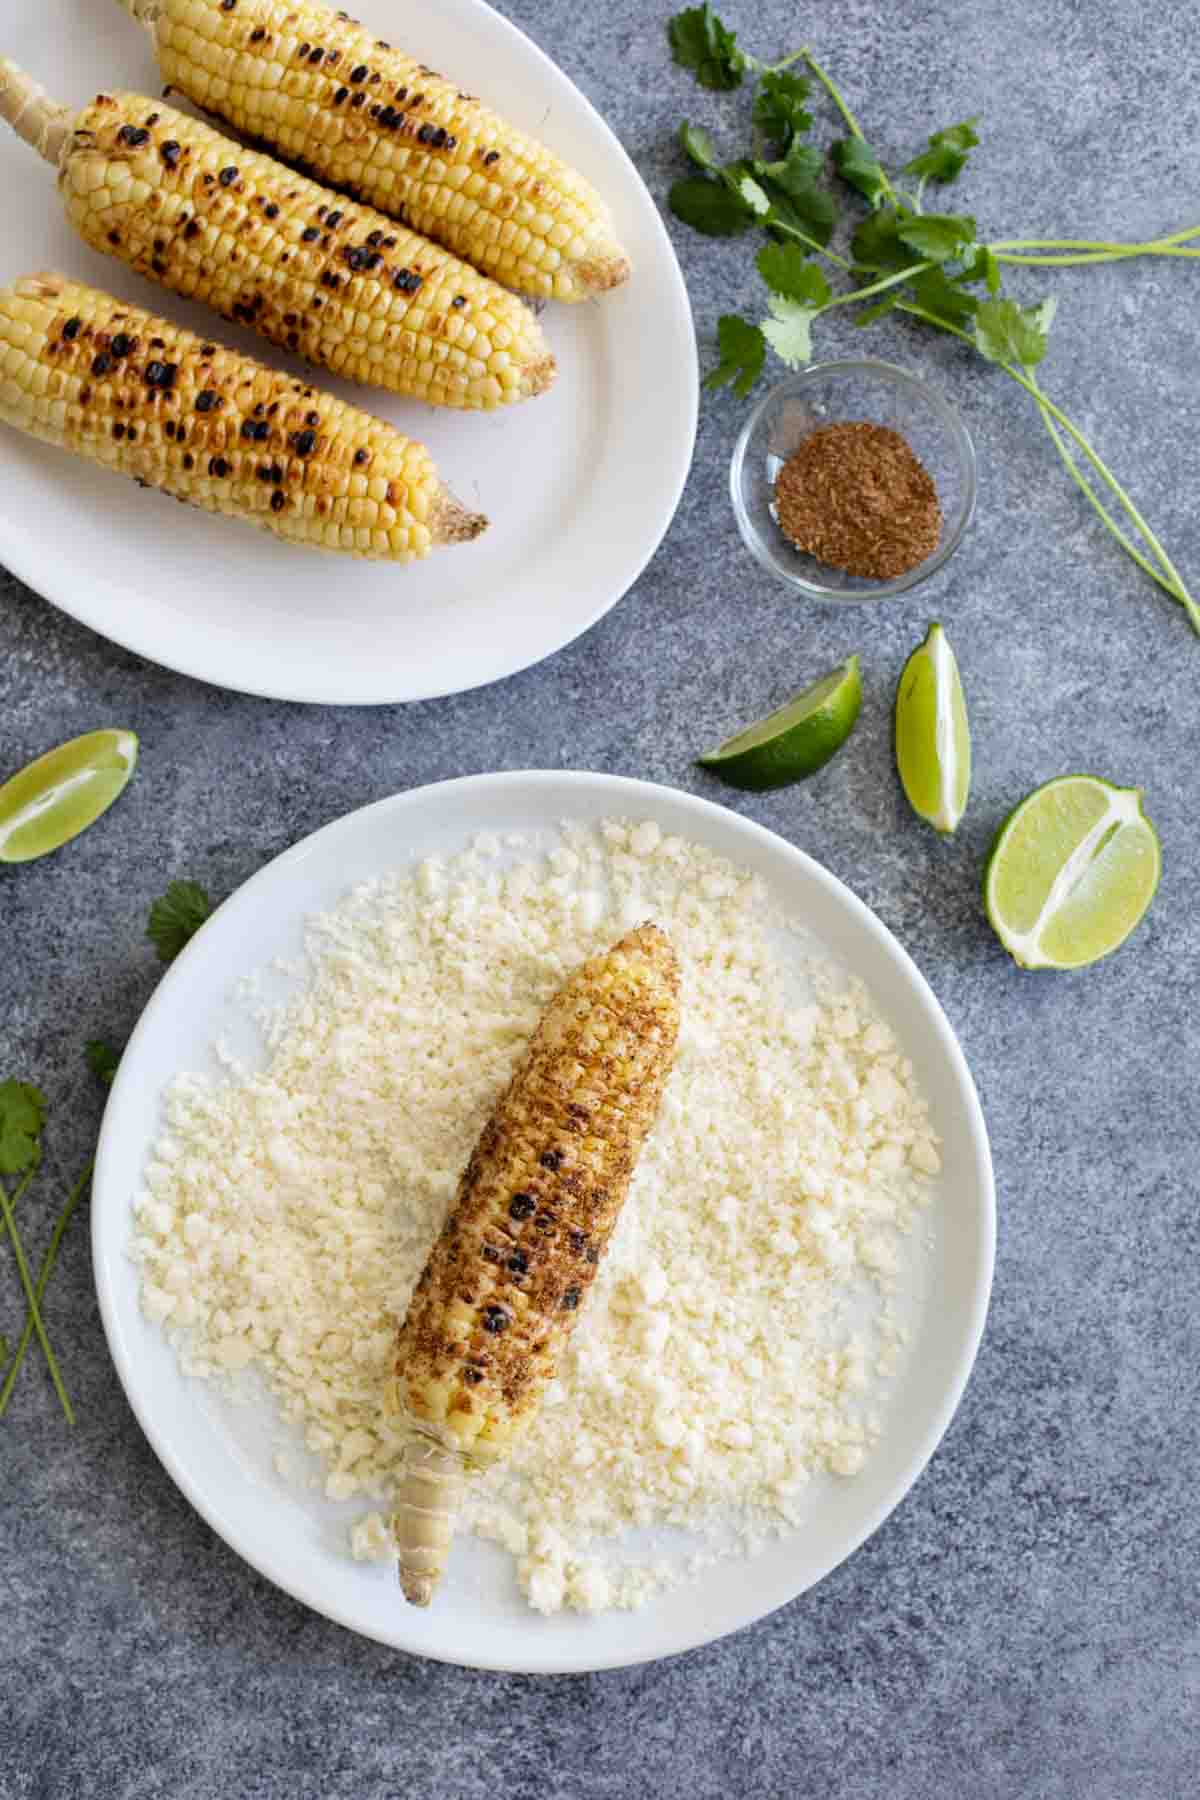 rolling grilled corn in cotija cheese